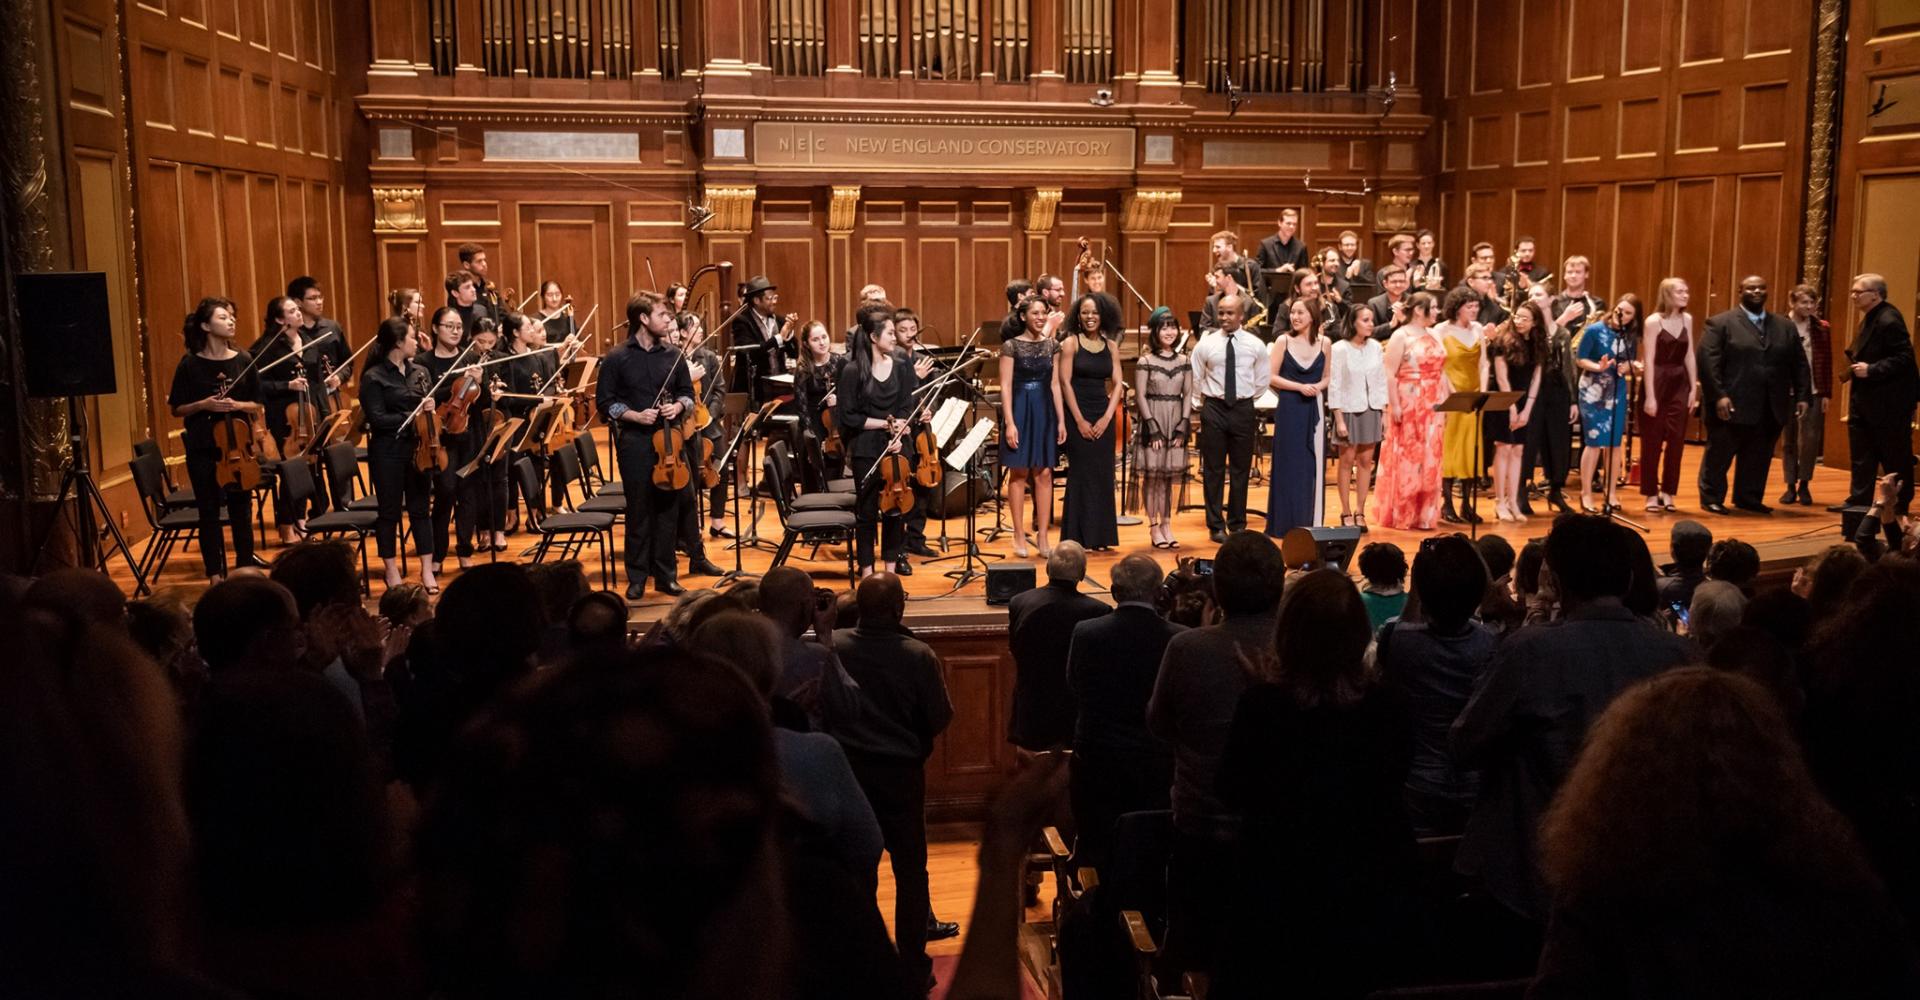 Performers take a bow in Jordan Hall while the audience stands and applauds